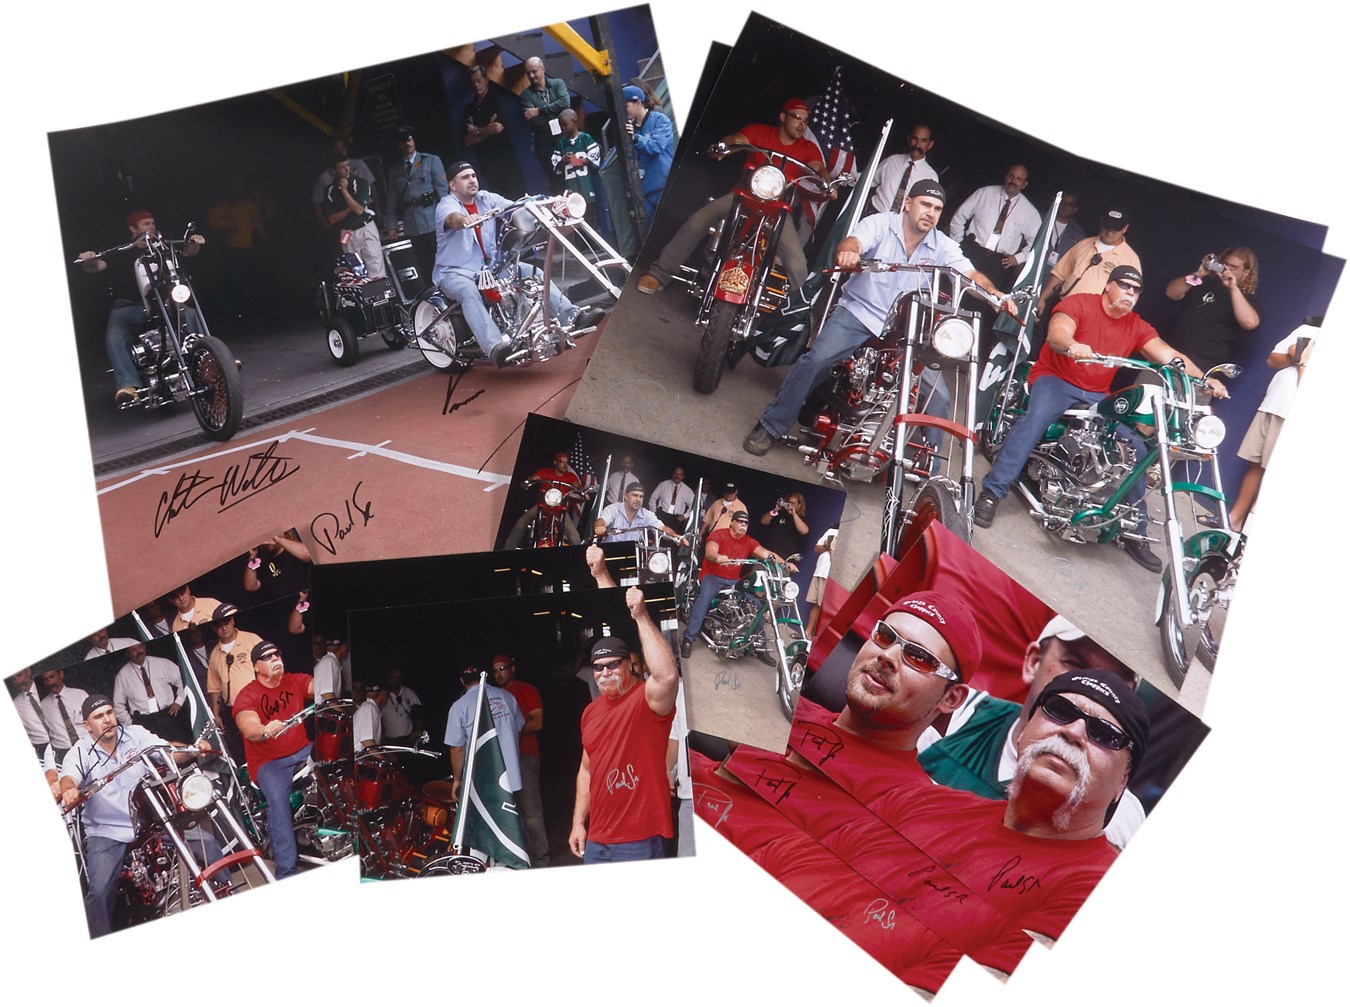 Rock 'N' Roll - "American Chopper" 8x10" & 16x20” In Person Signed Photographs from VIP Photographer Richard Brightly (11)